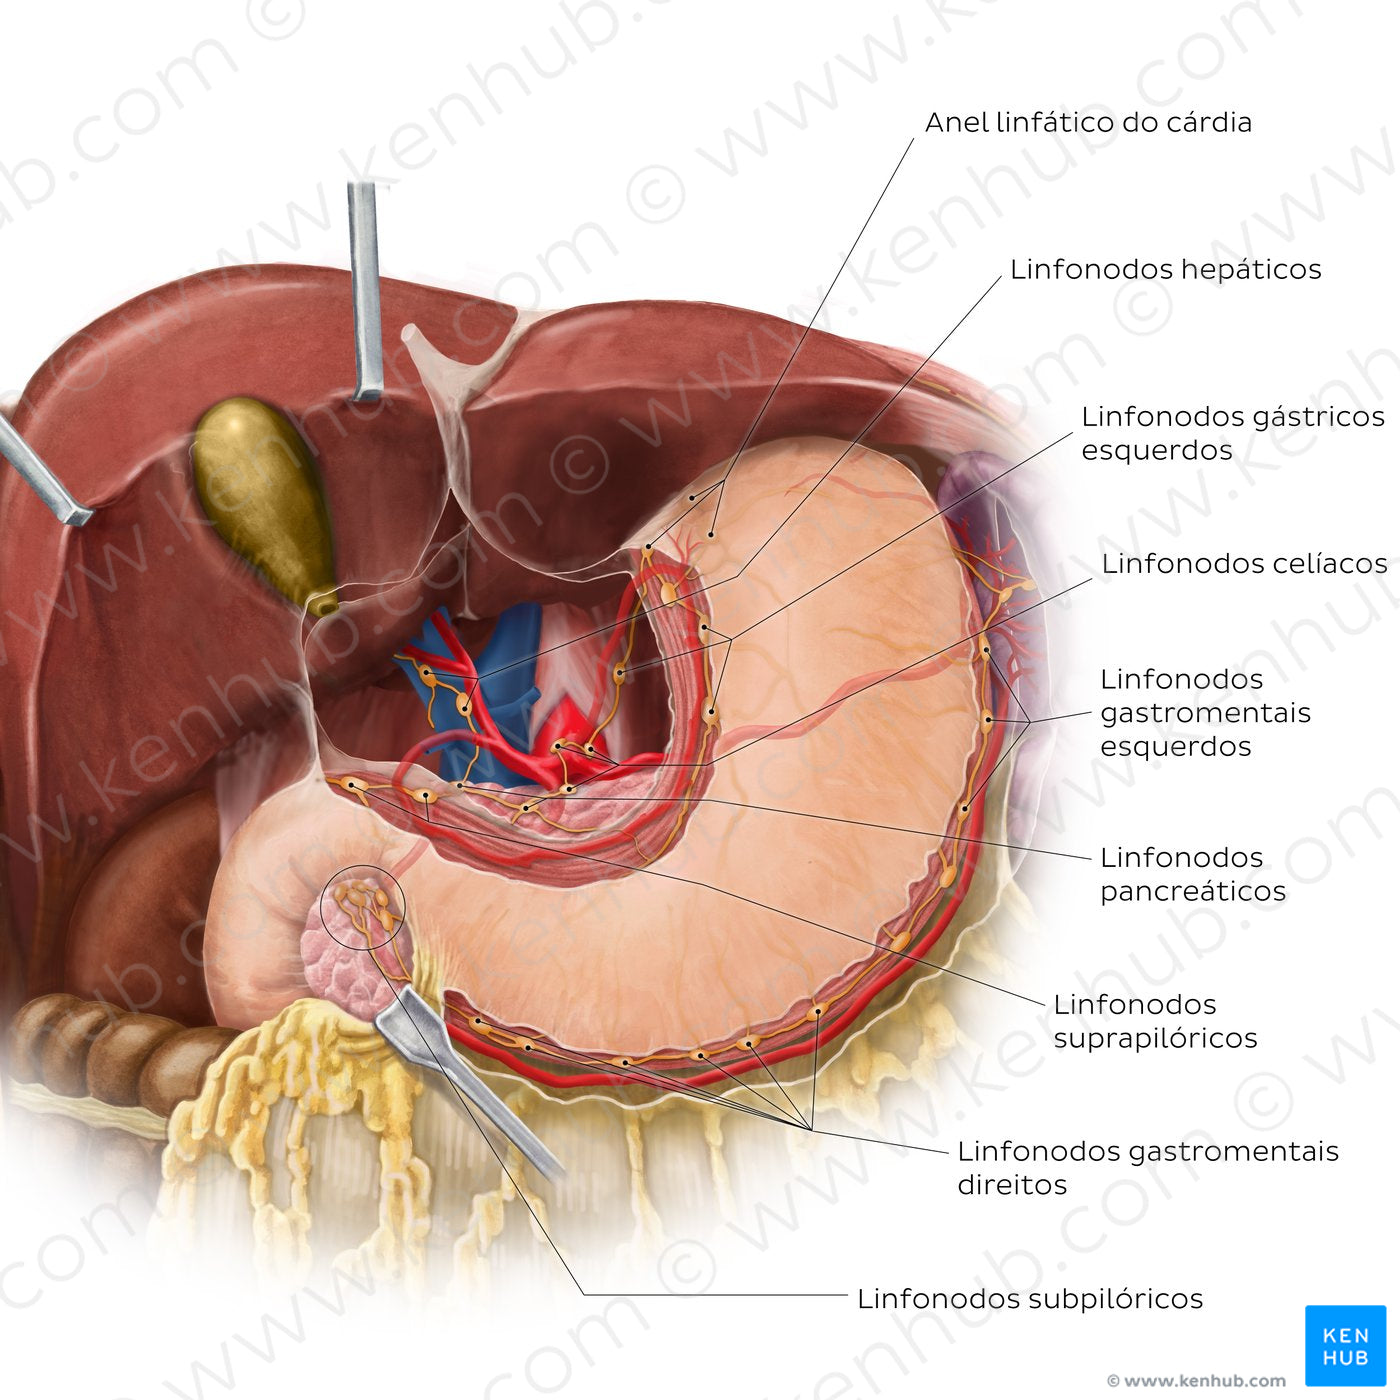 Lymphatics of the stomach and liver (Portuguese)